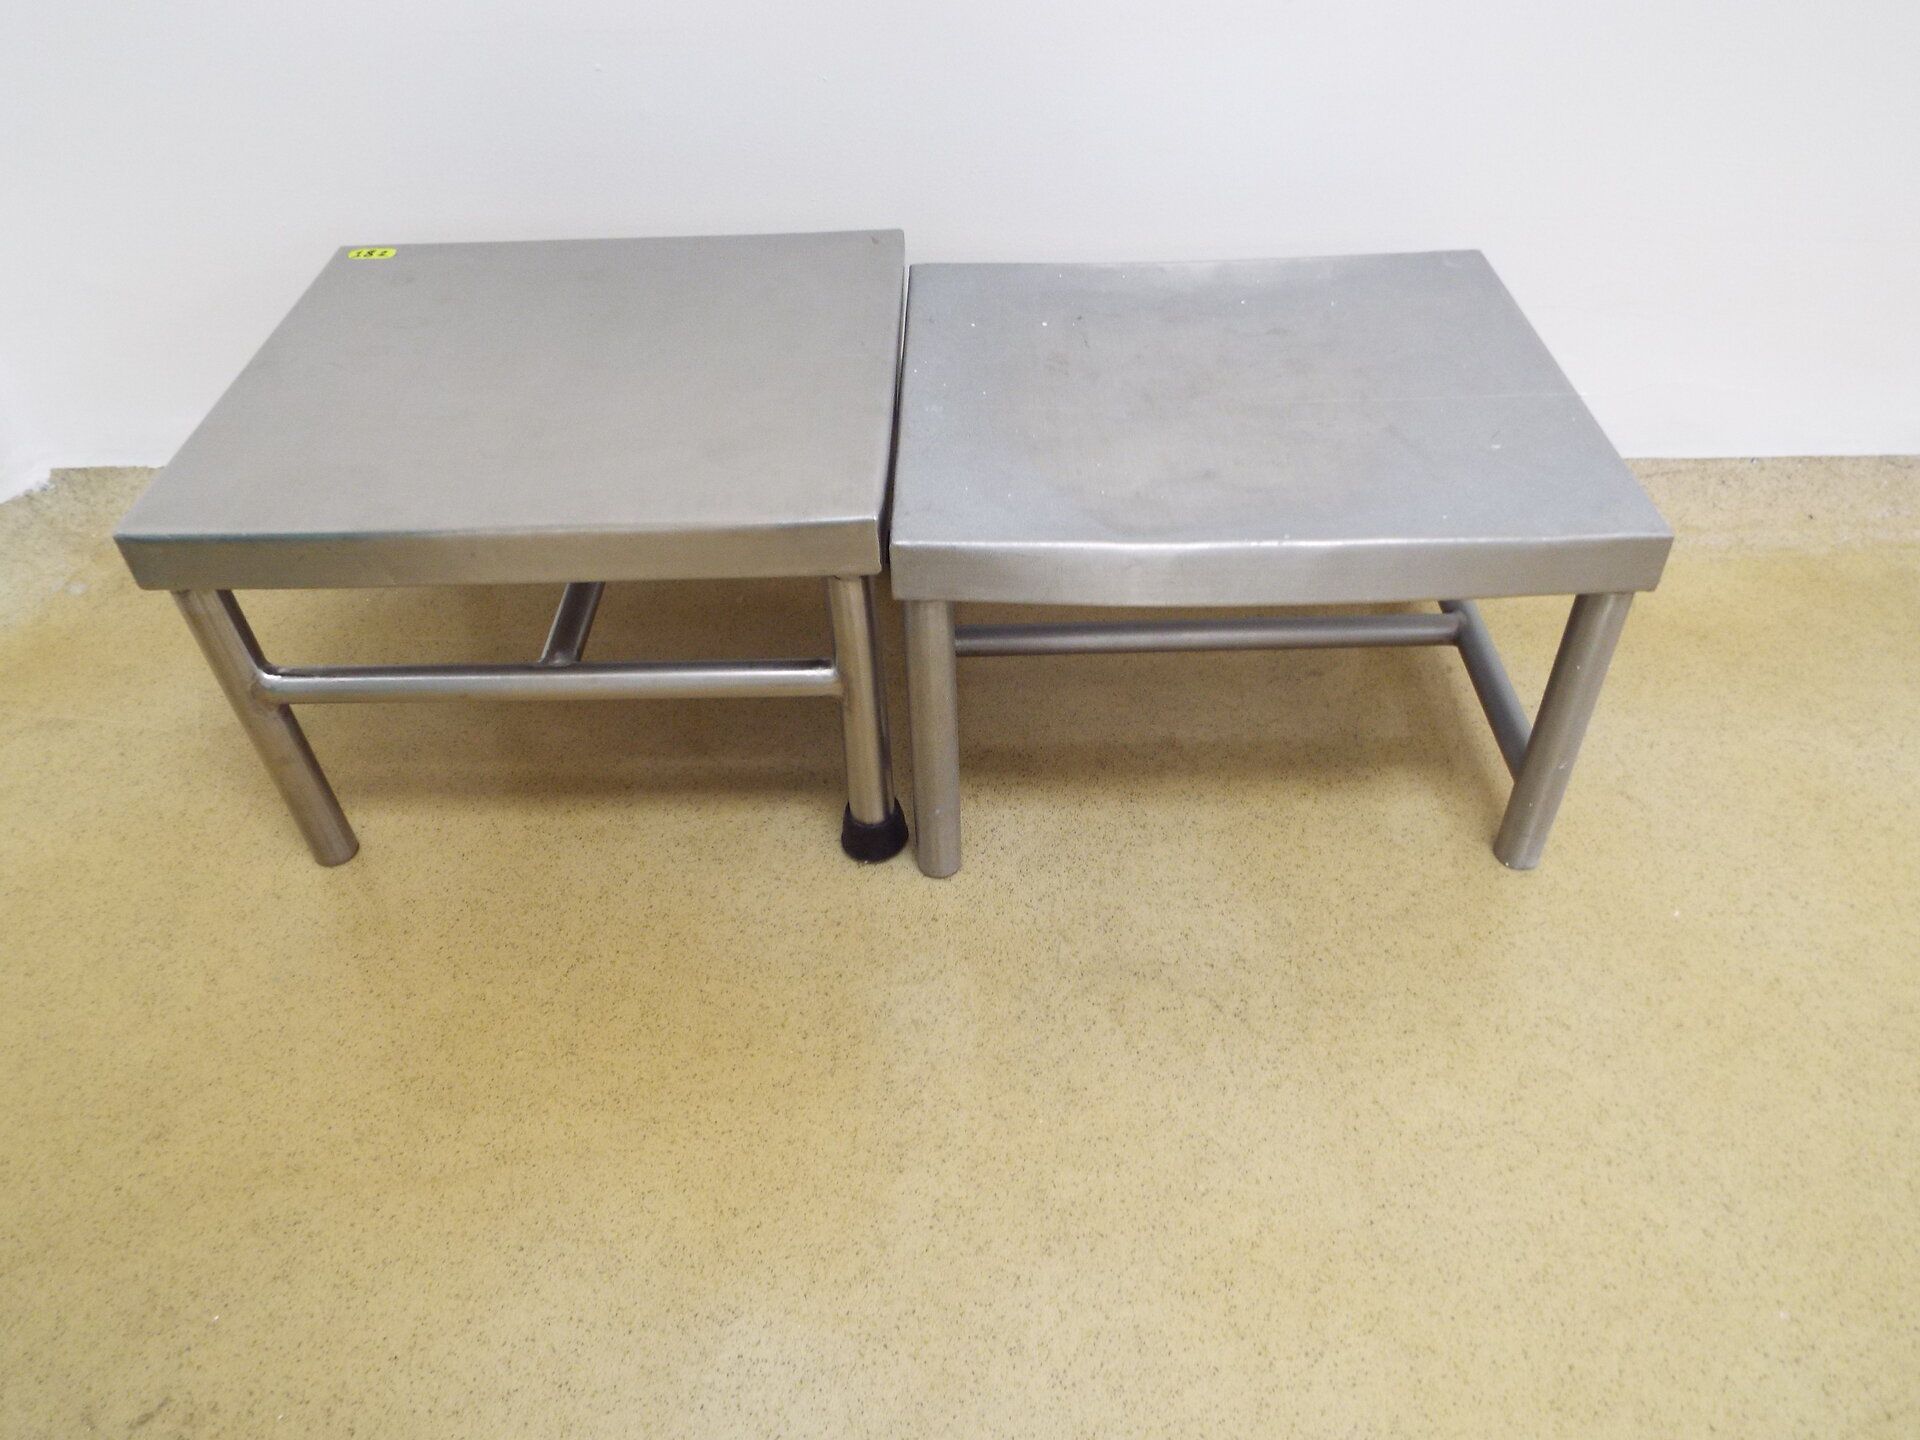 (6) Stainless Steel stools